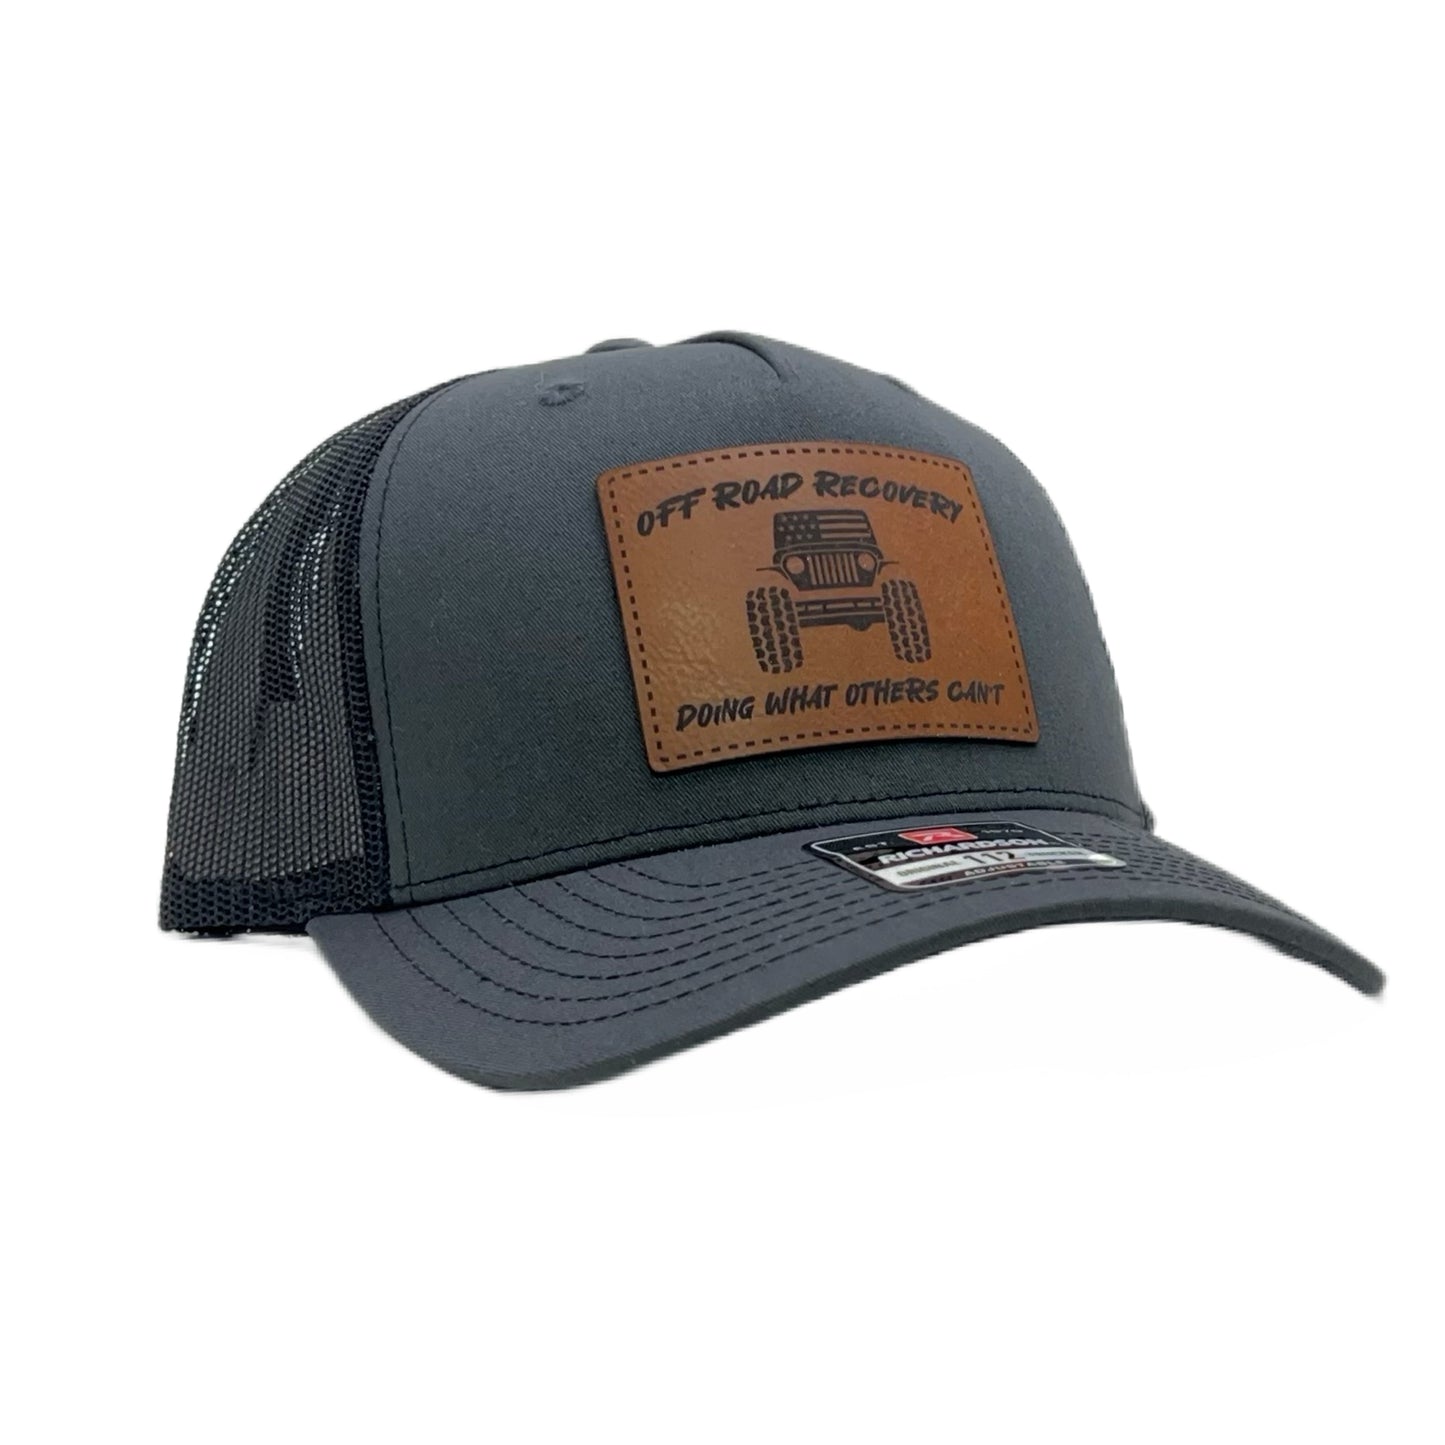 Off Road Recovery Cap, Richardson 112FP, Leather Patch